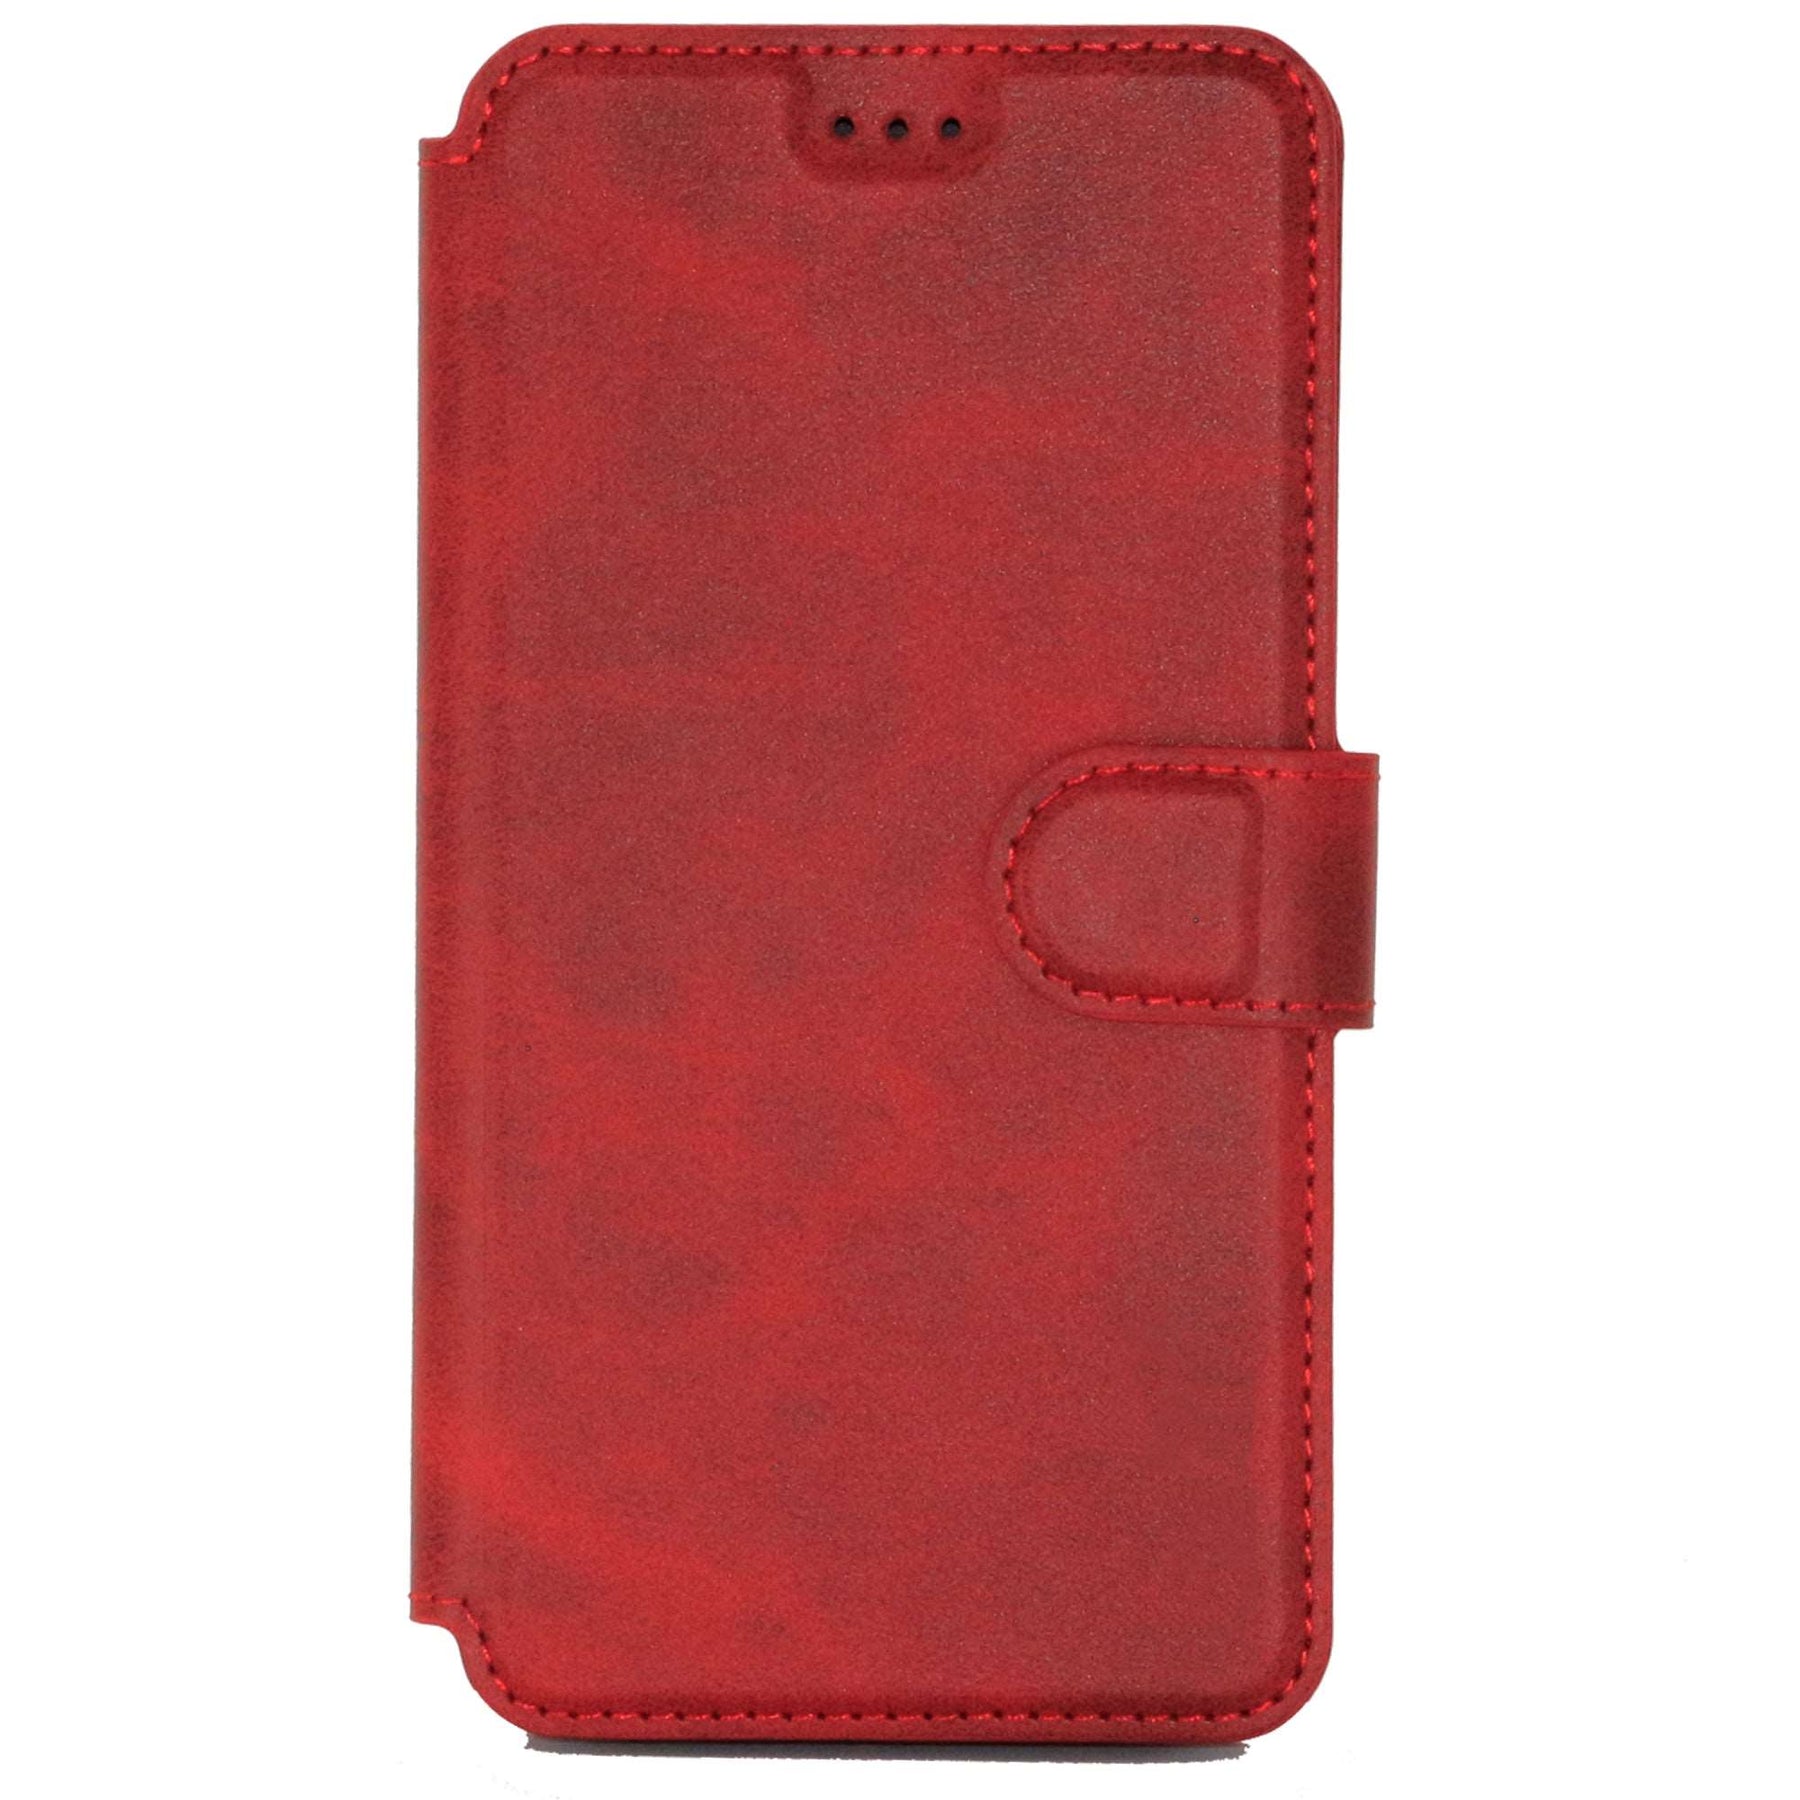 Apple iPhone 12 Mini Leather Wallet Case Color Red